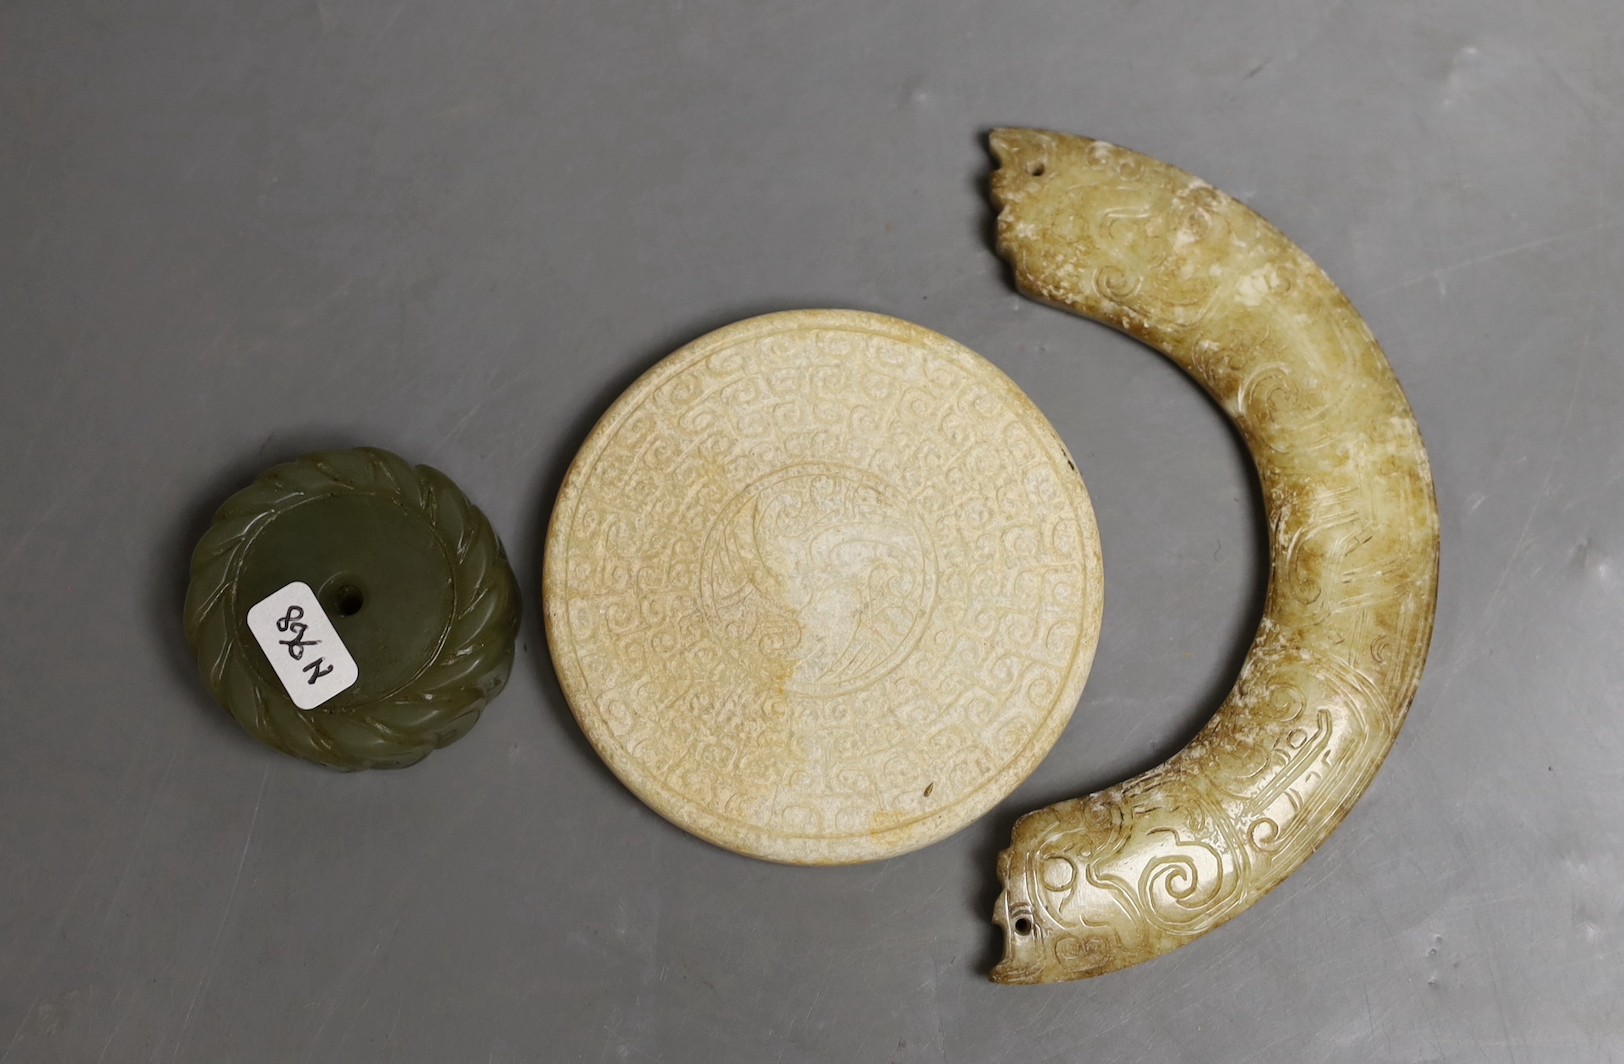 Three Chinese jade carvings - a huang, a disc and cash money